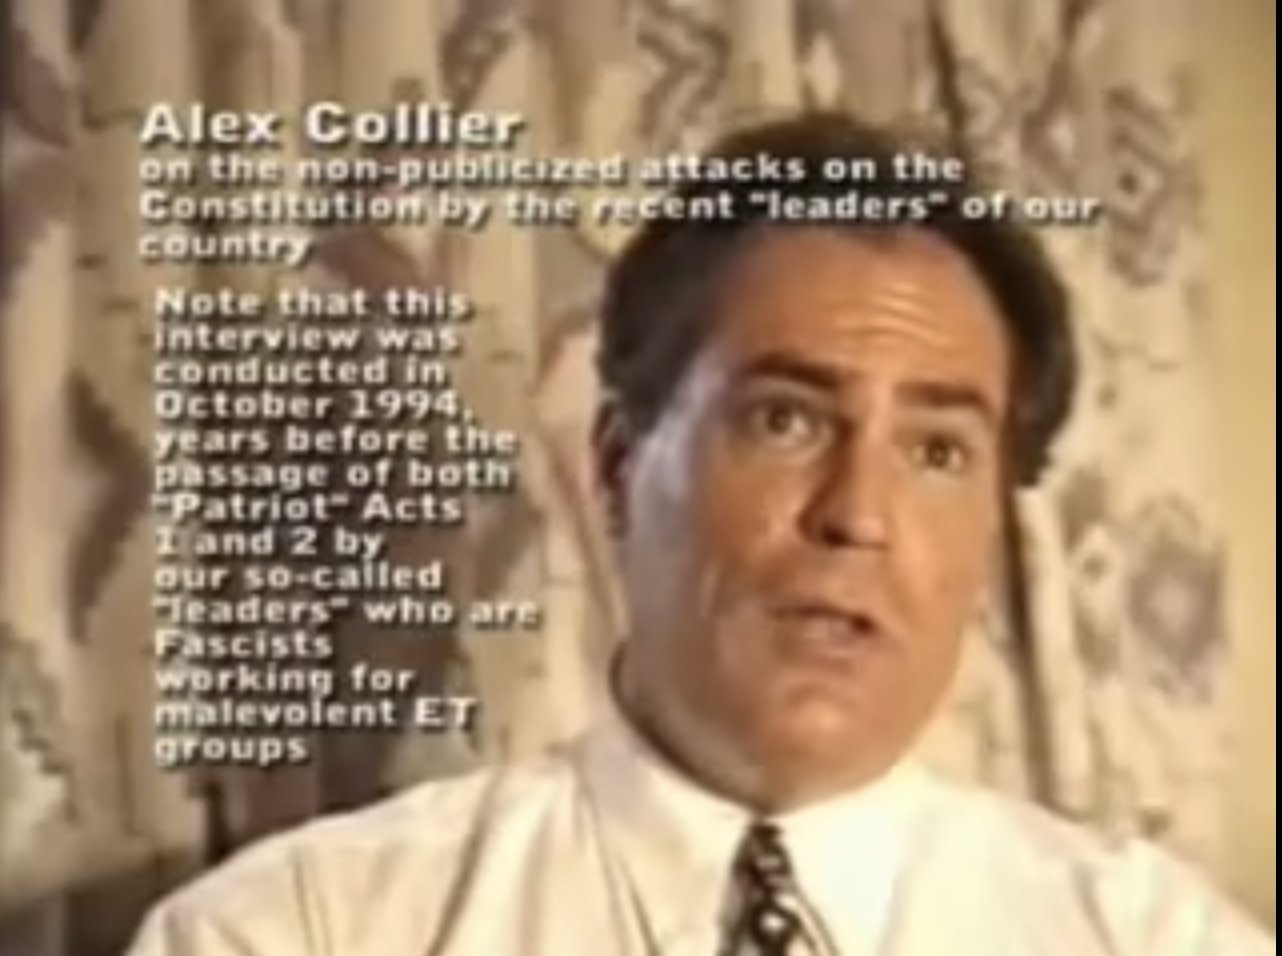 Man predicts 9/11 in 1994